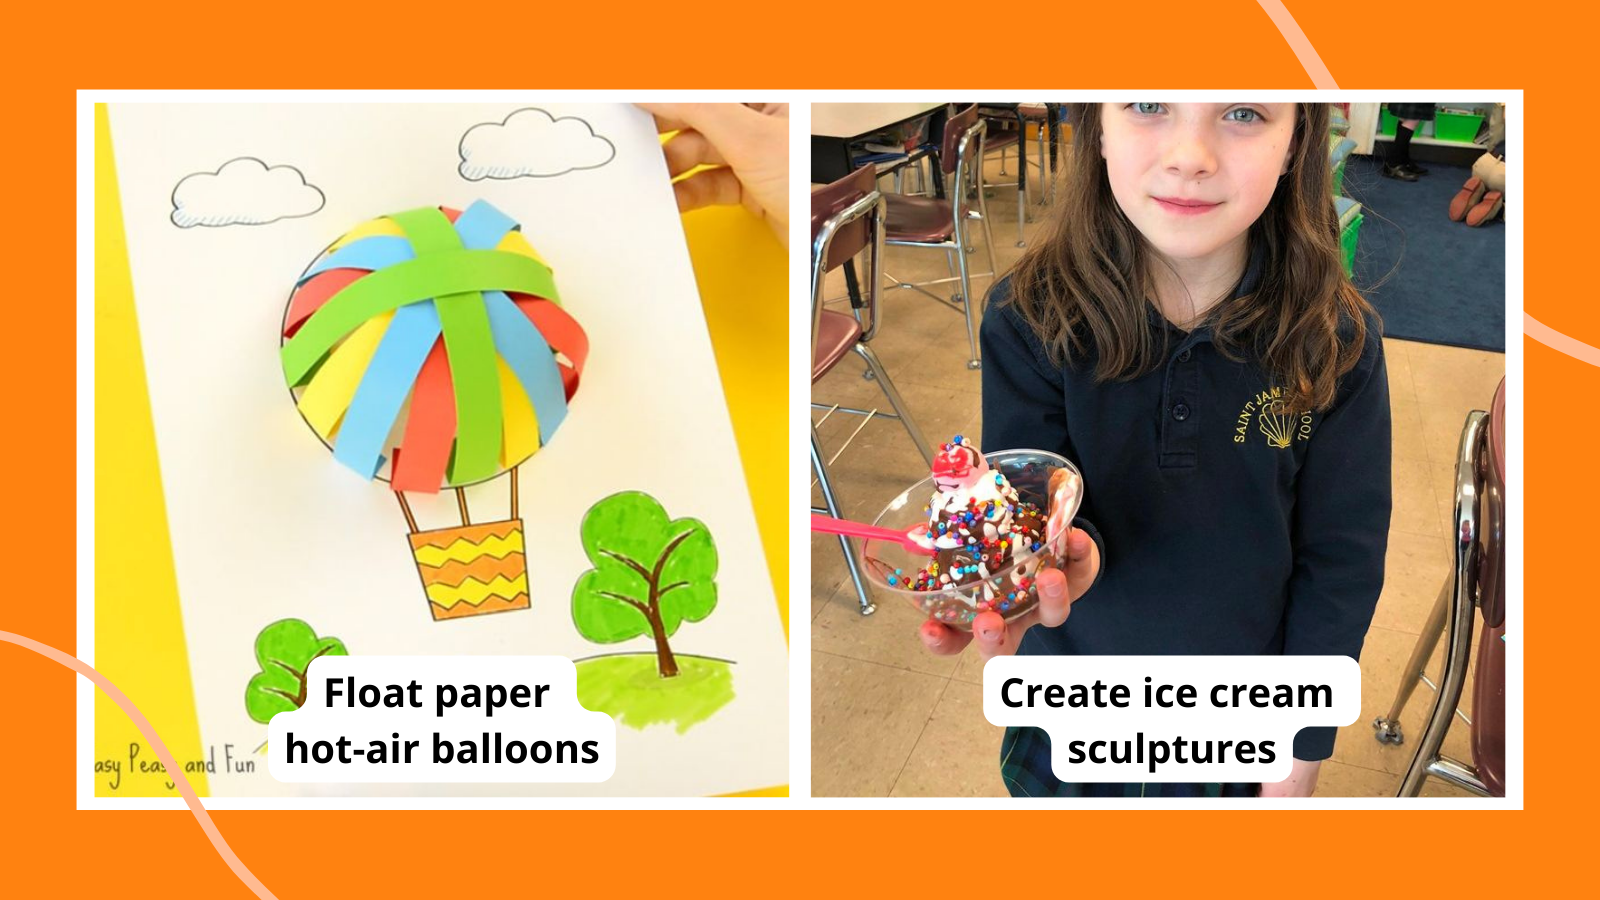 Examples of second grade art projects including a girl holding an ice cream sculpture and a self-portrait of a student reading a book.